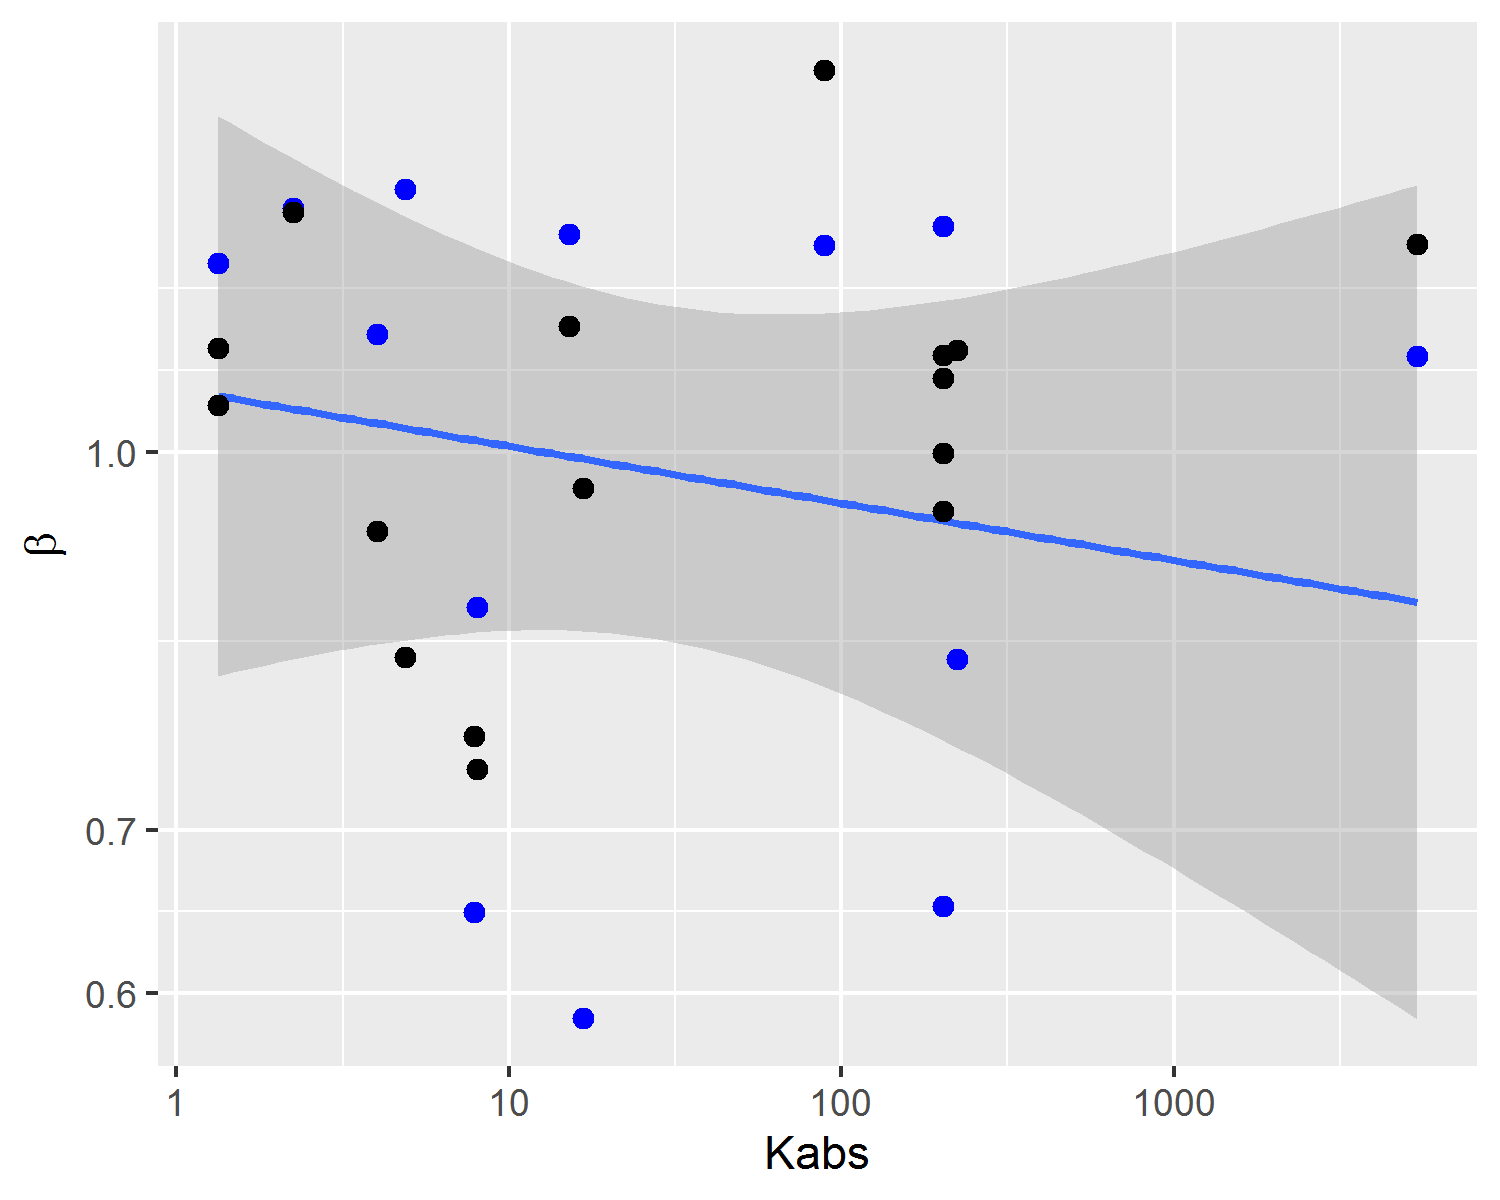 Experimental capillary pressure curve parameters (blue dots and line tendency) and predicted parameters estimated using the posterior mean (black dots).